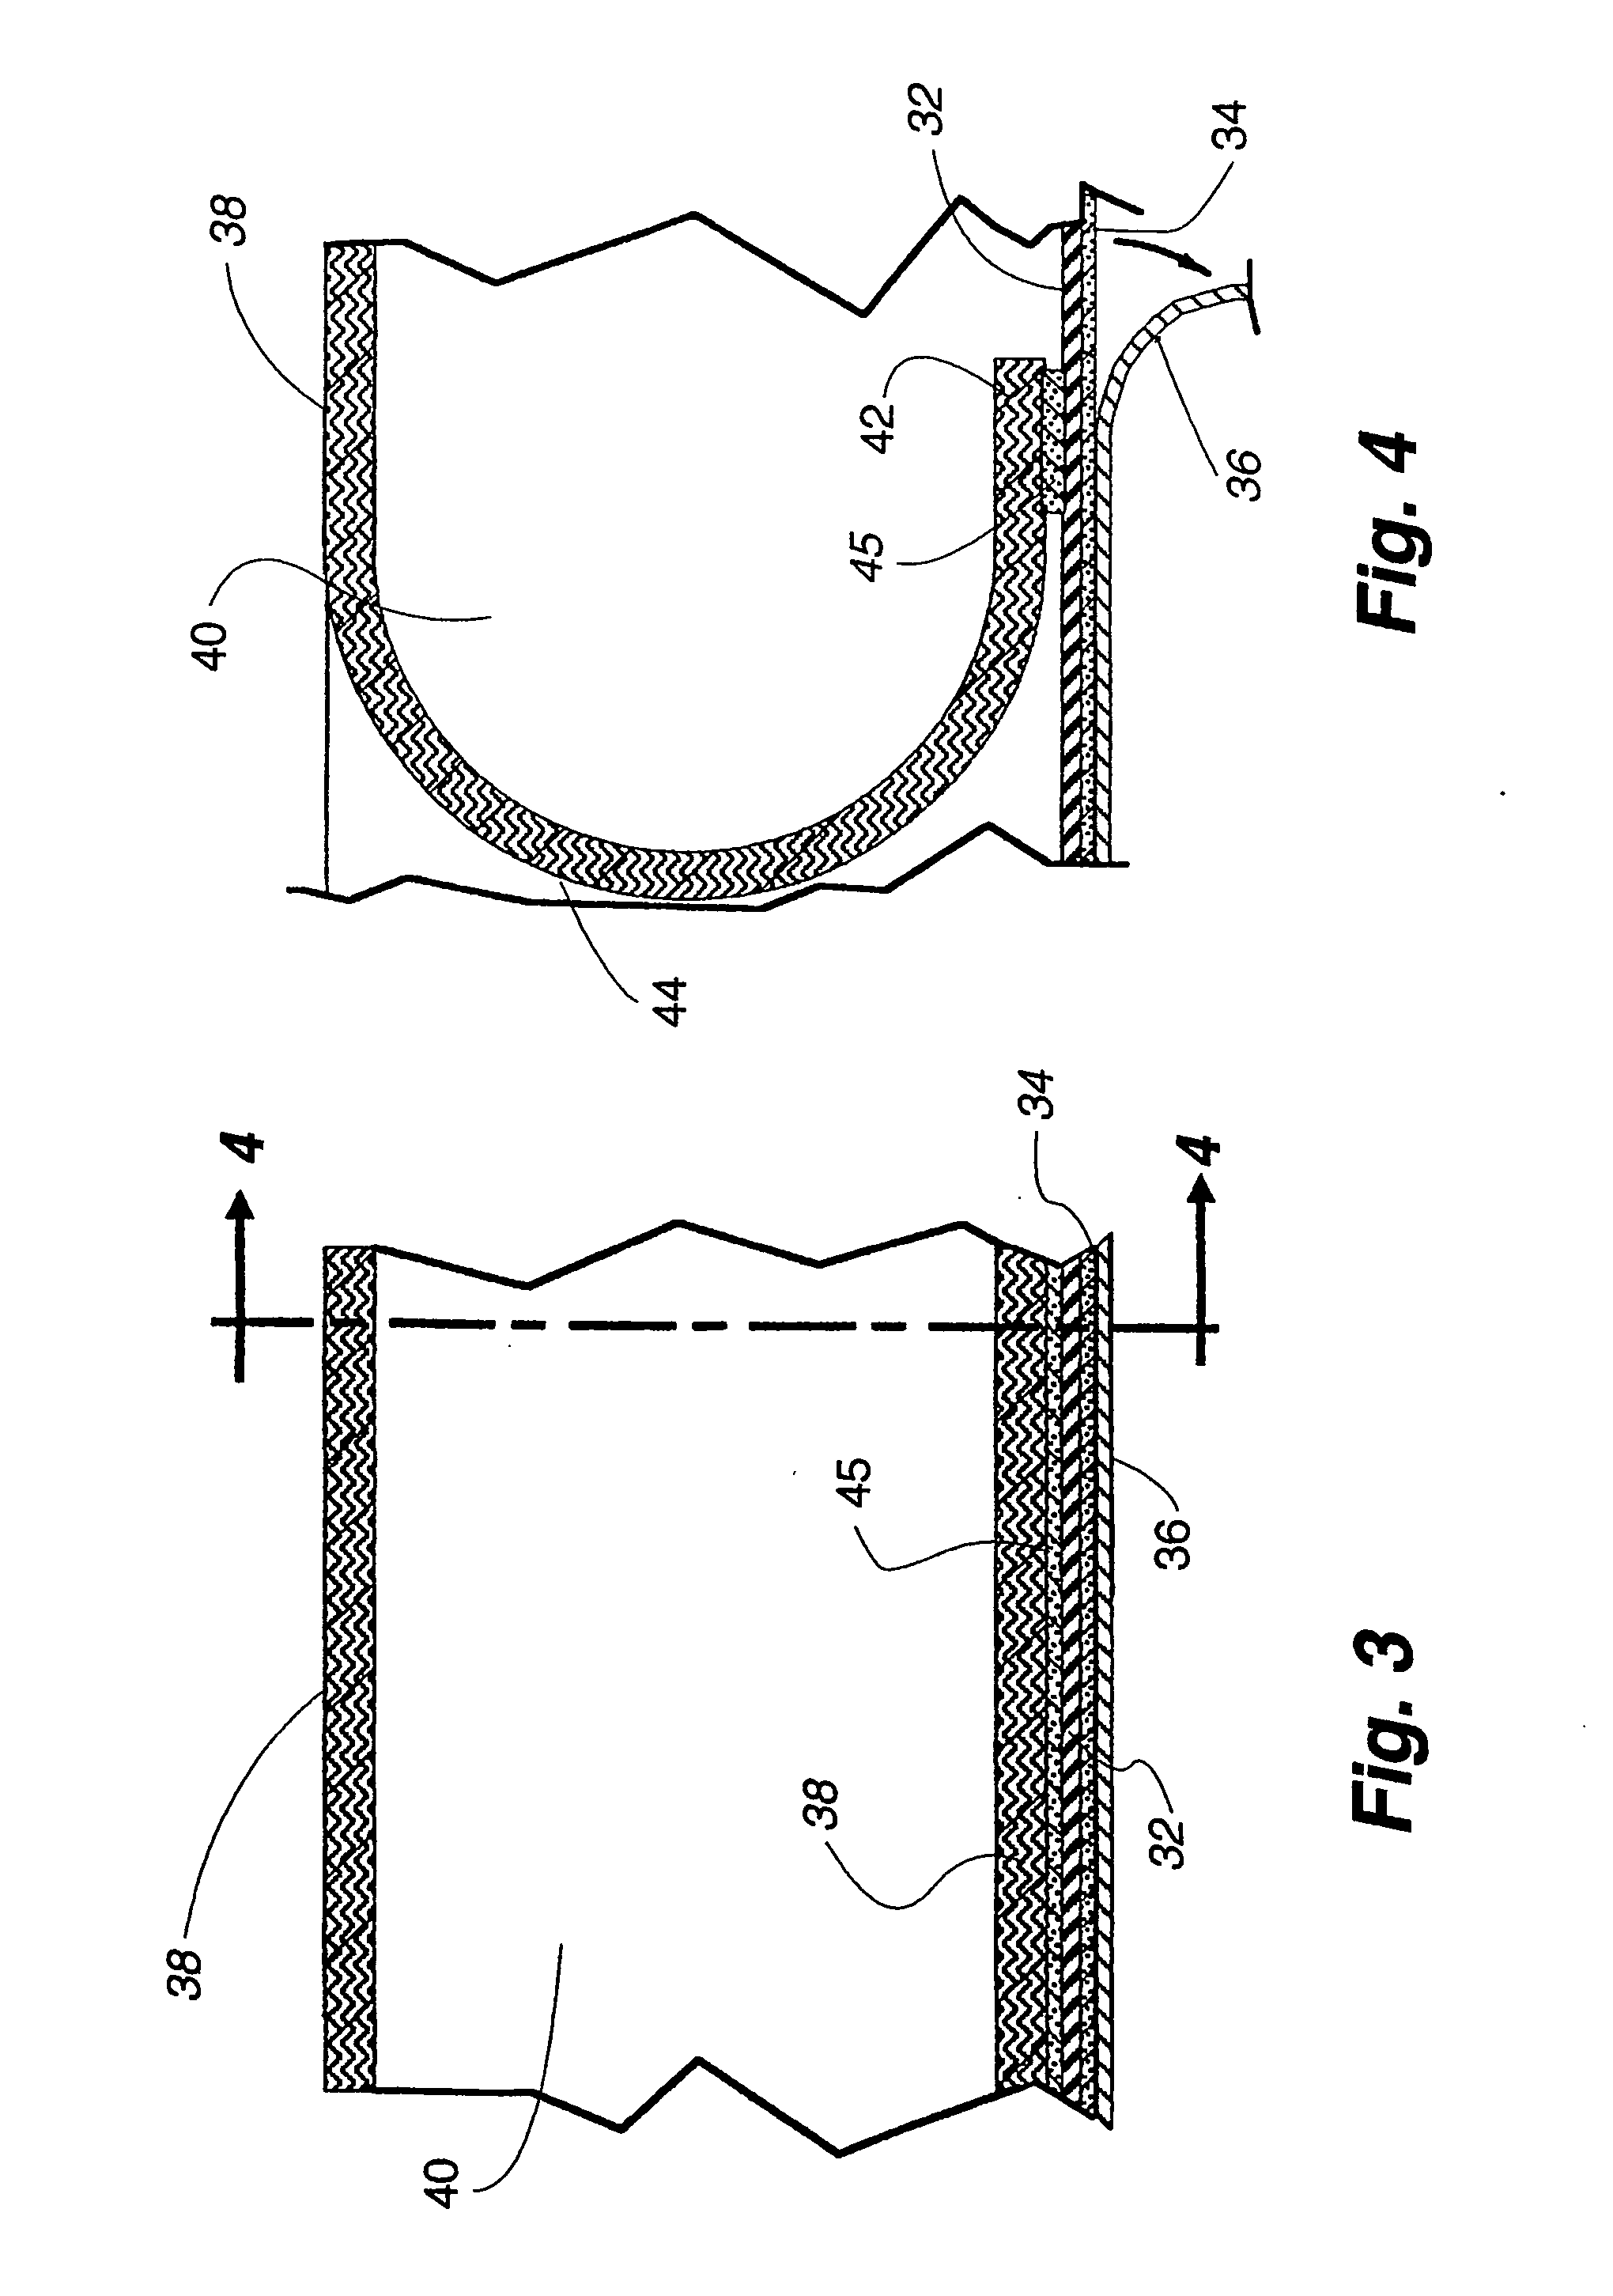 Covering for architectural surfaces and method of forming and applying same